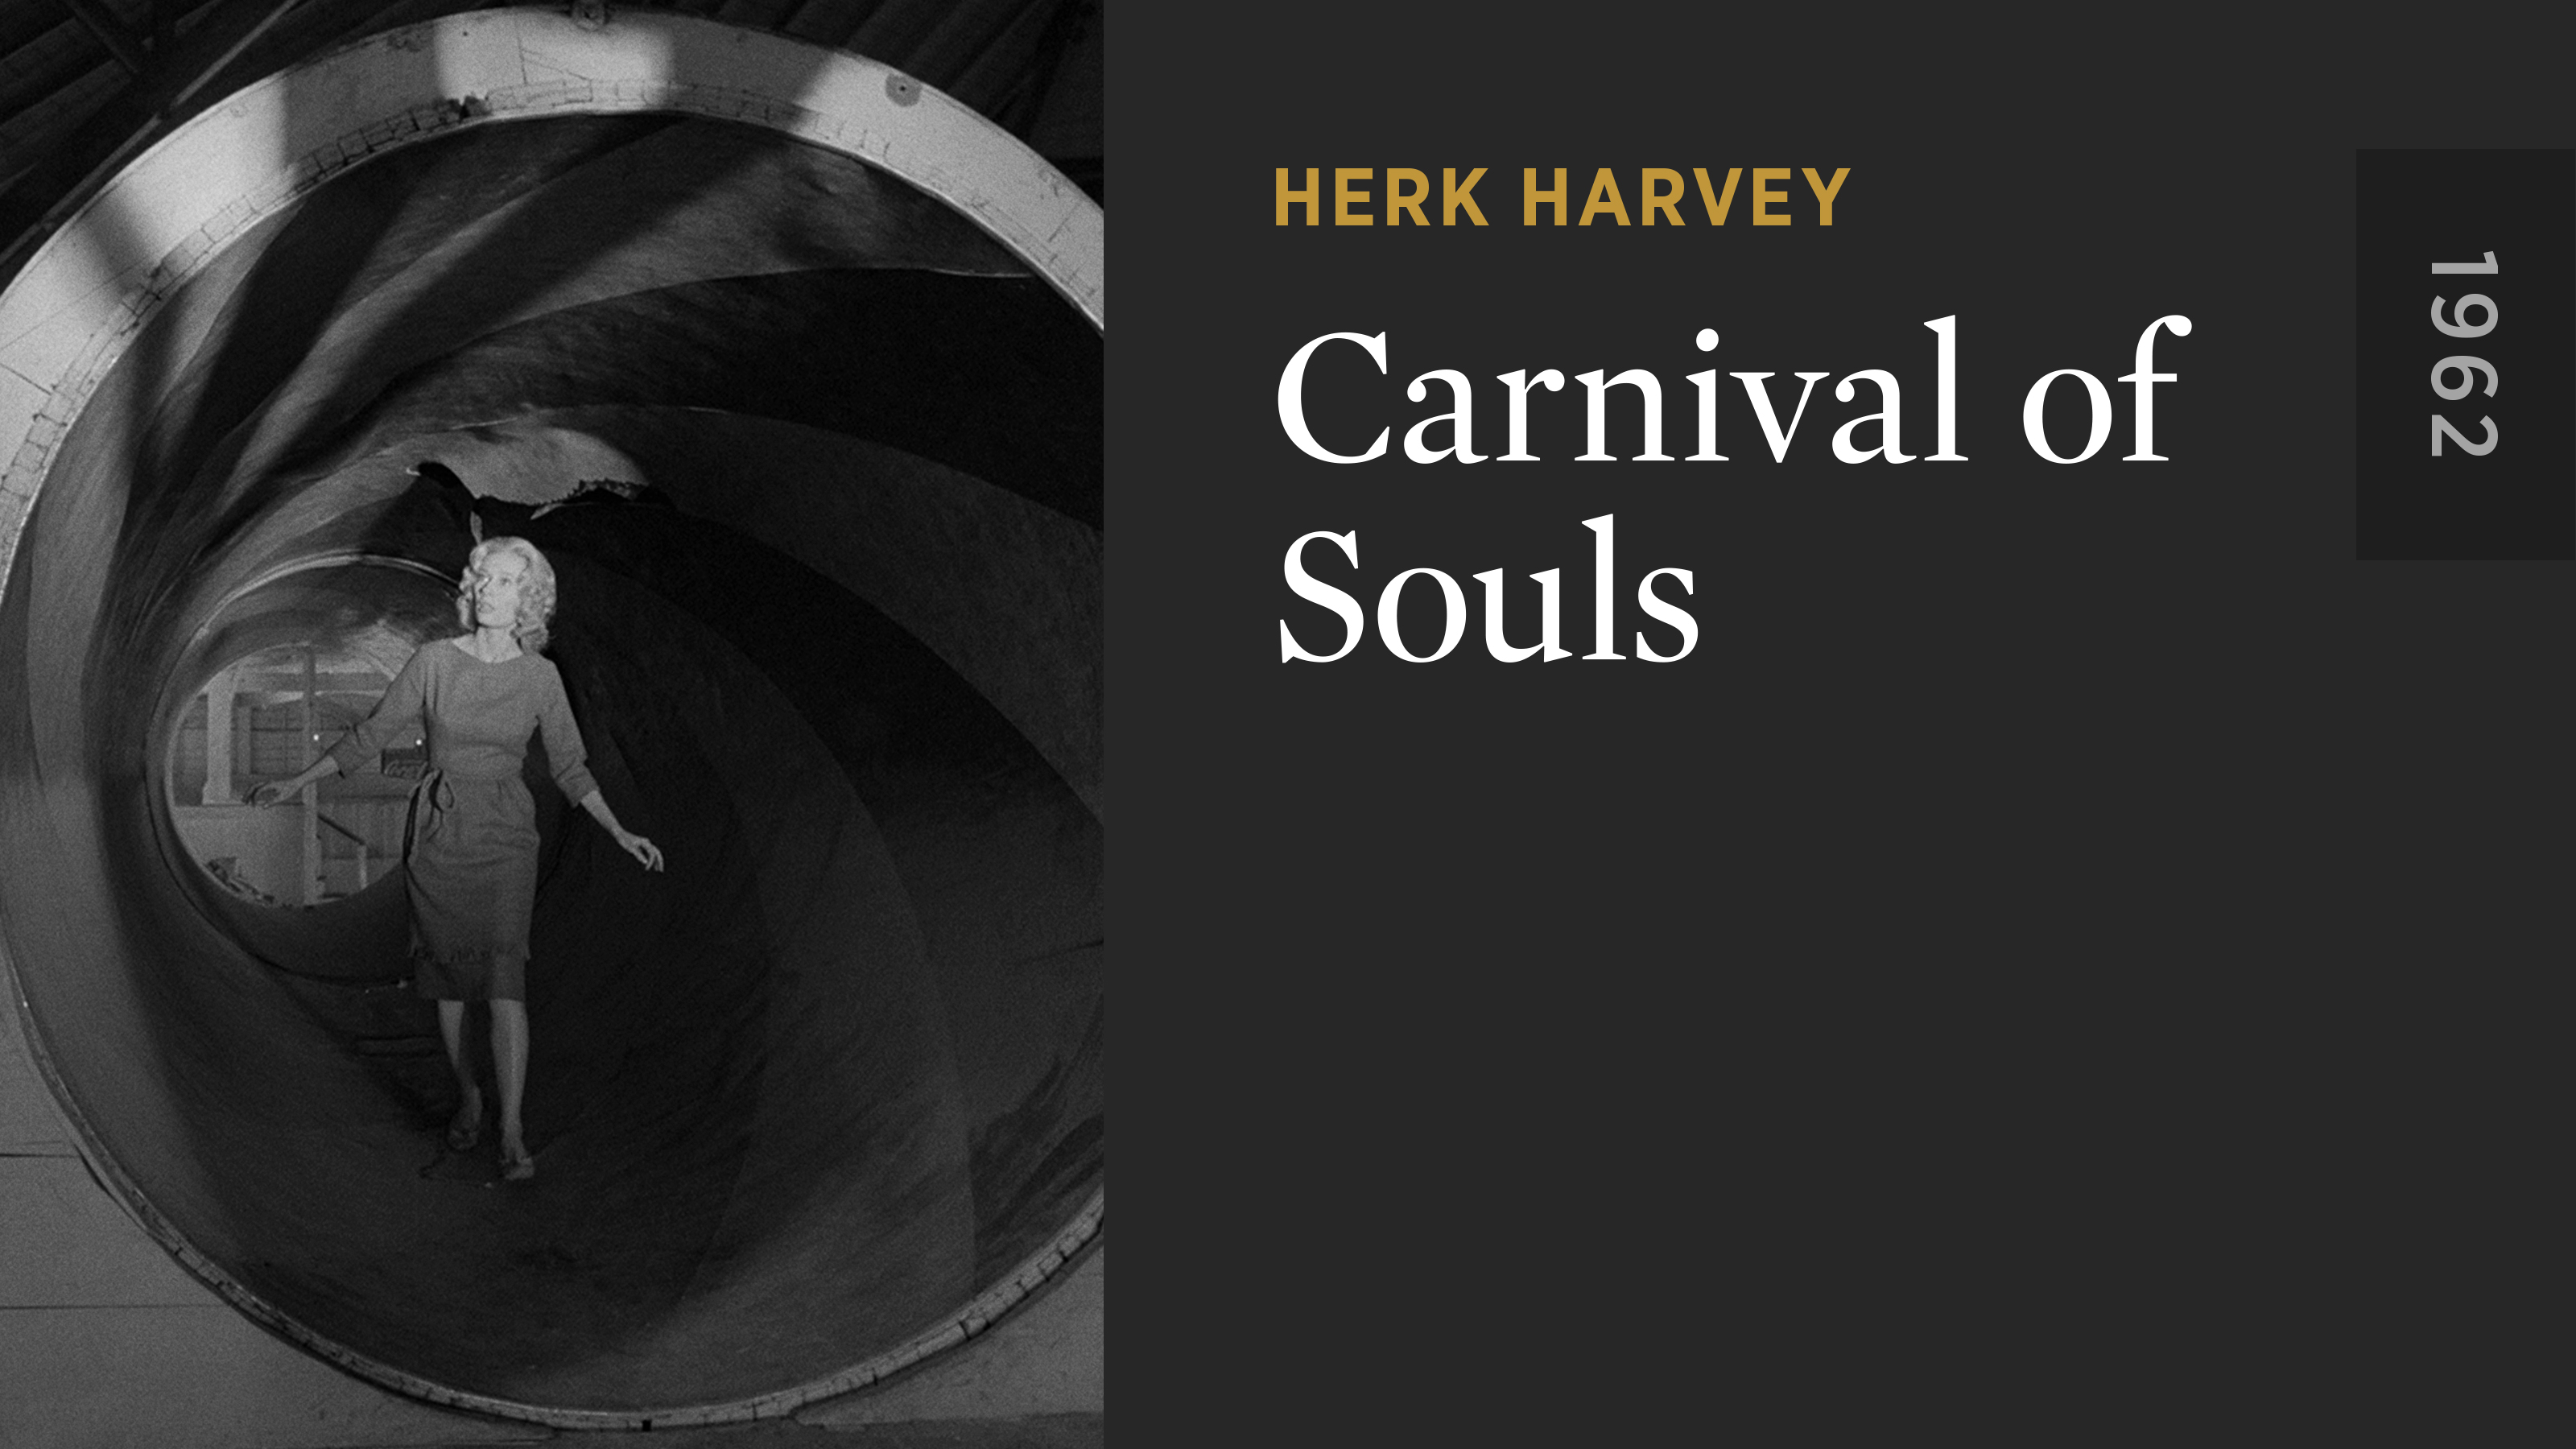 Carnival of Souls - The Criterion Channel